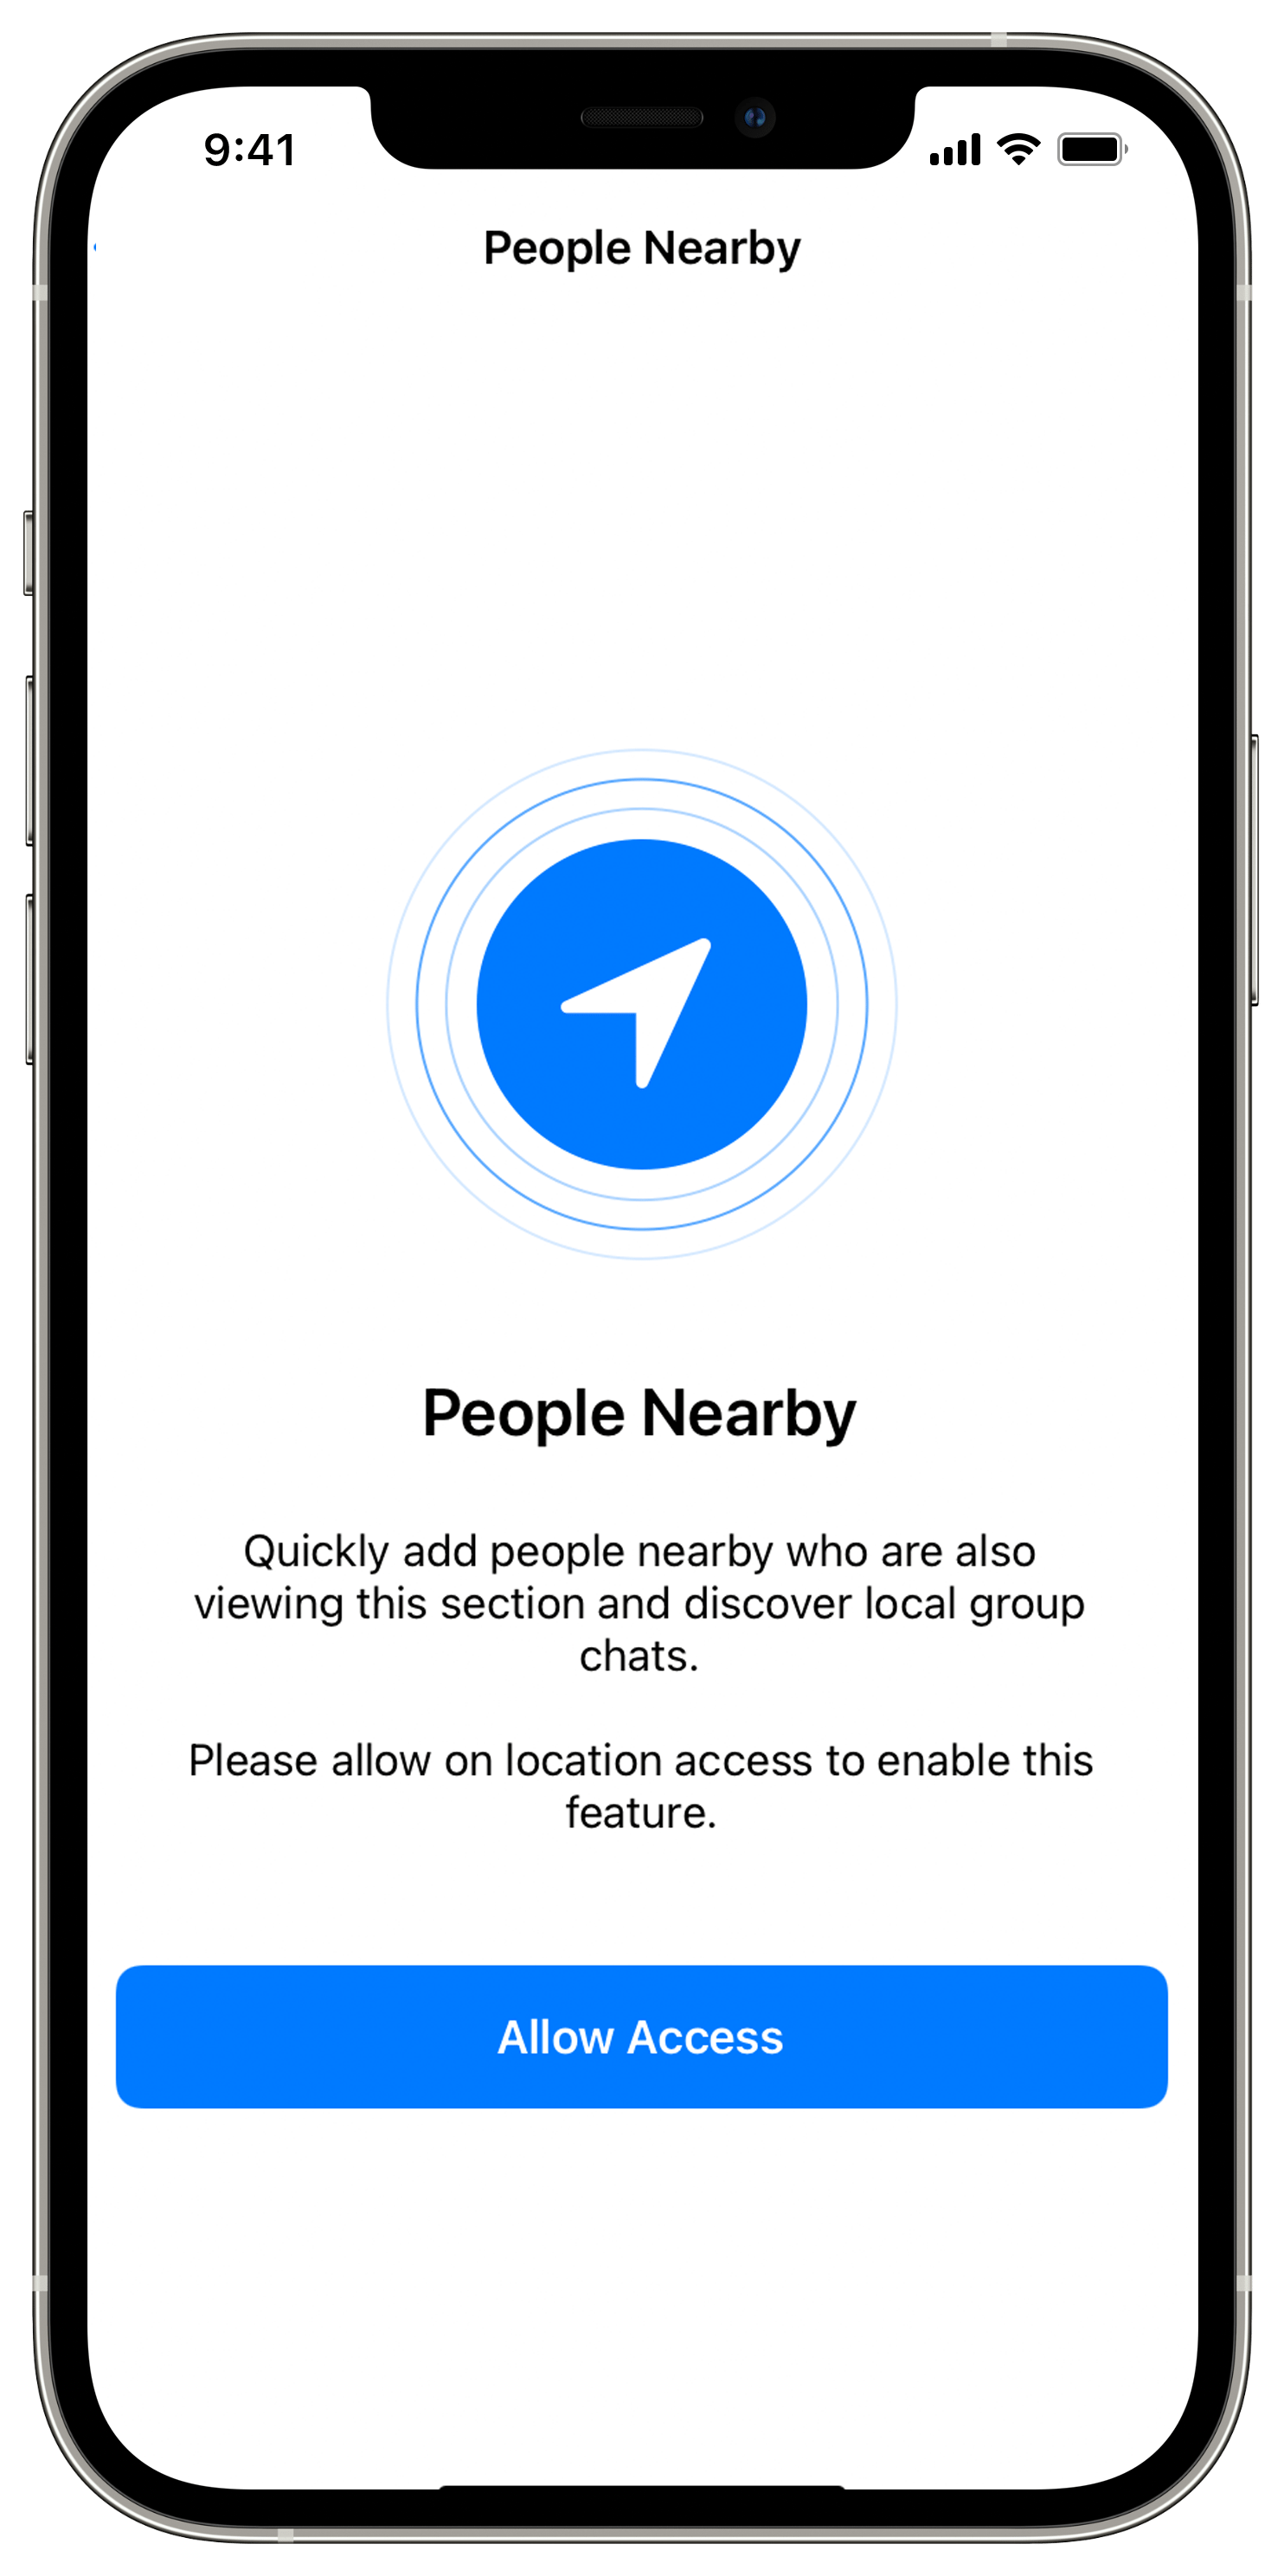 Telegram searching for people nearby on an iPhone